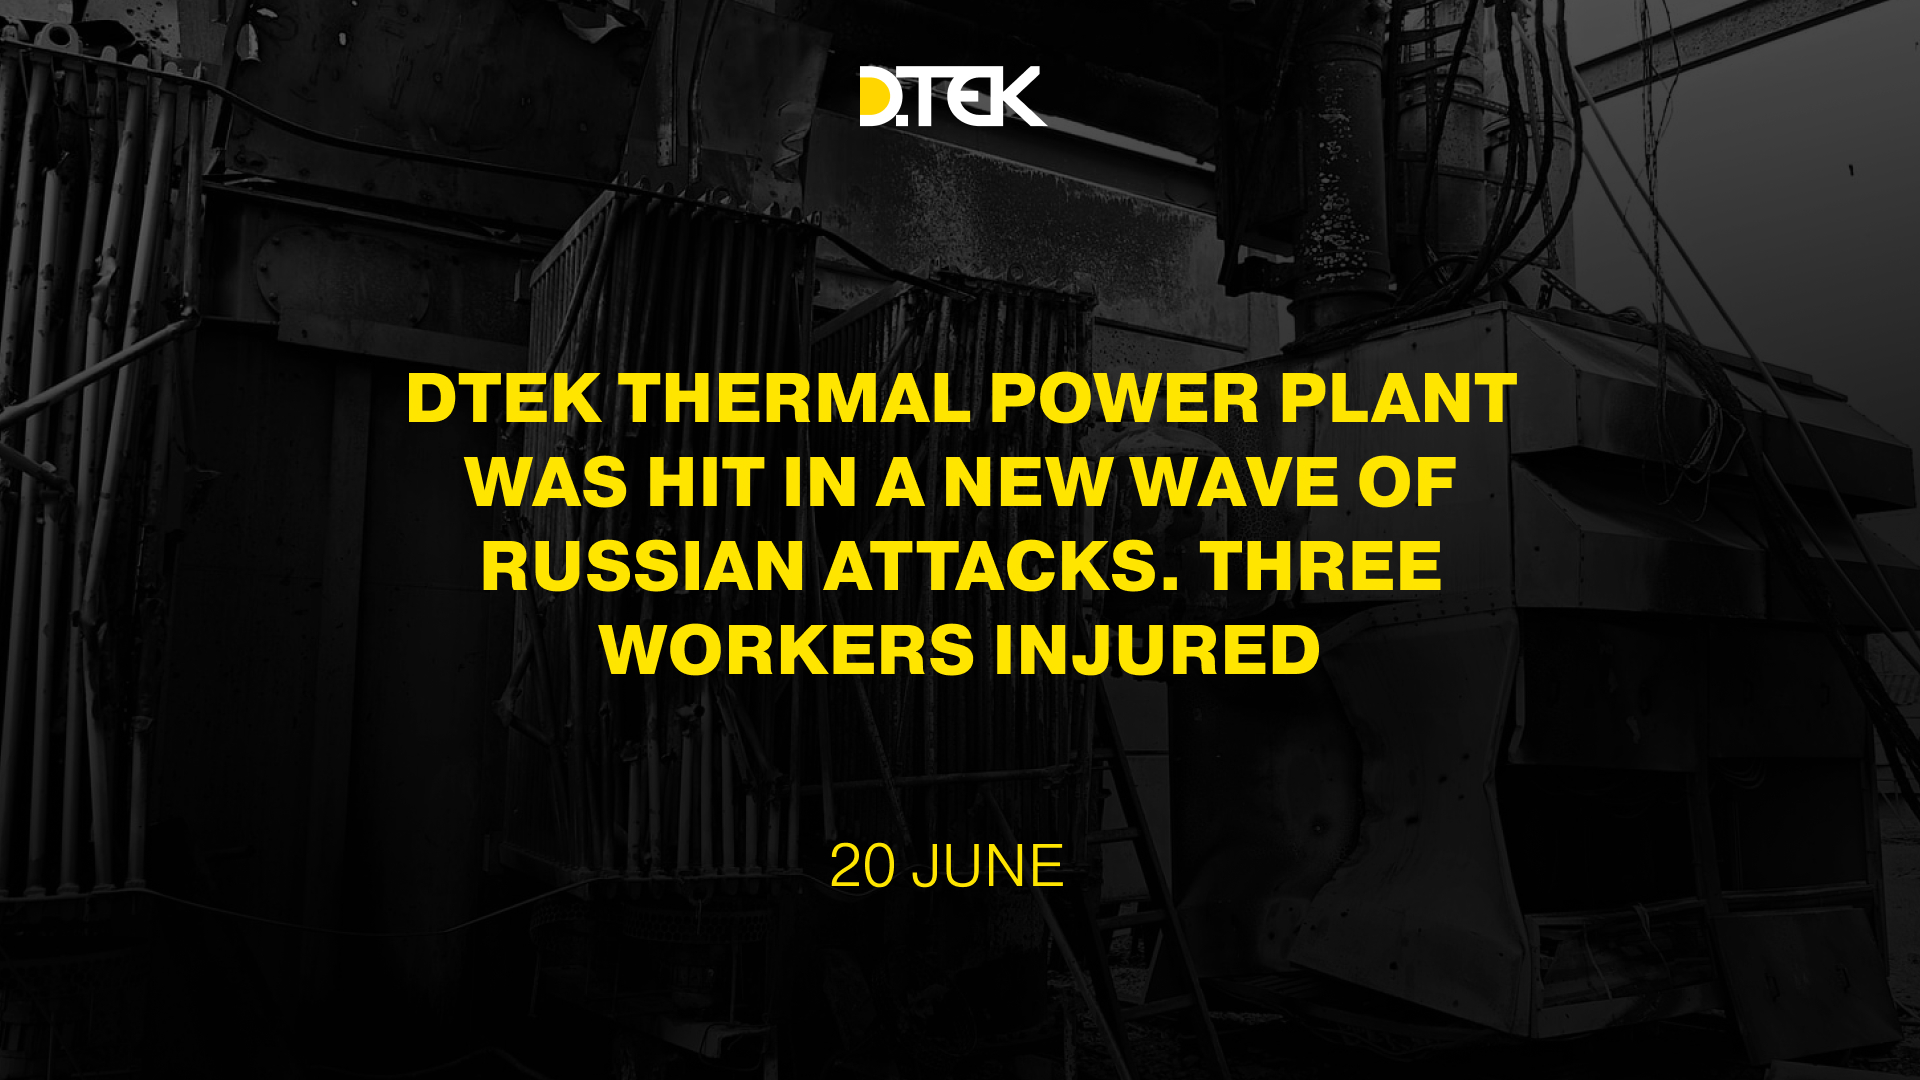 DTEK thermal power plant was hit in a new wave of russian attacks. Three workers injured